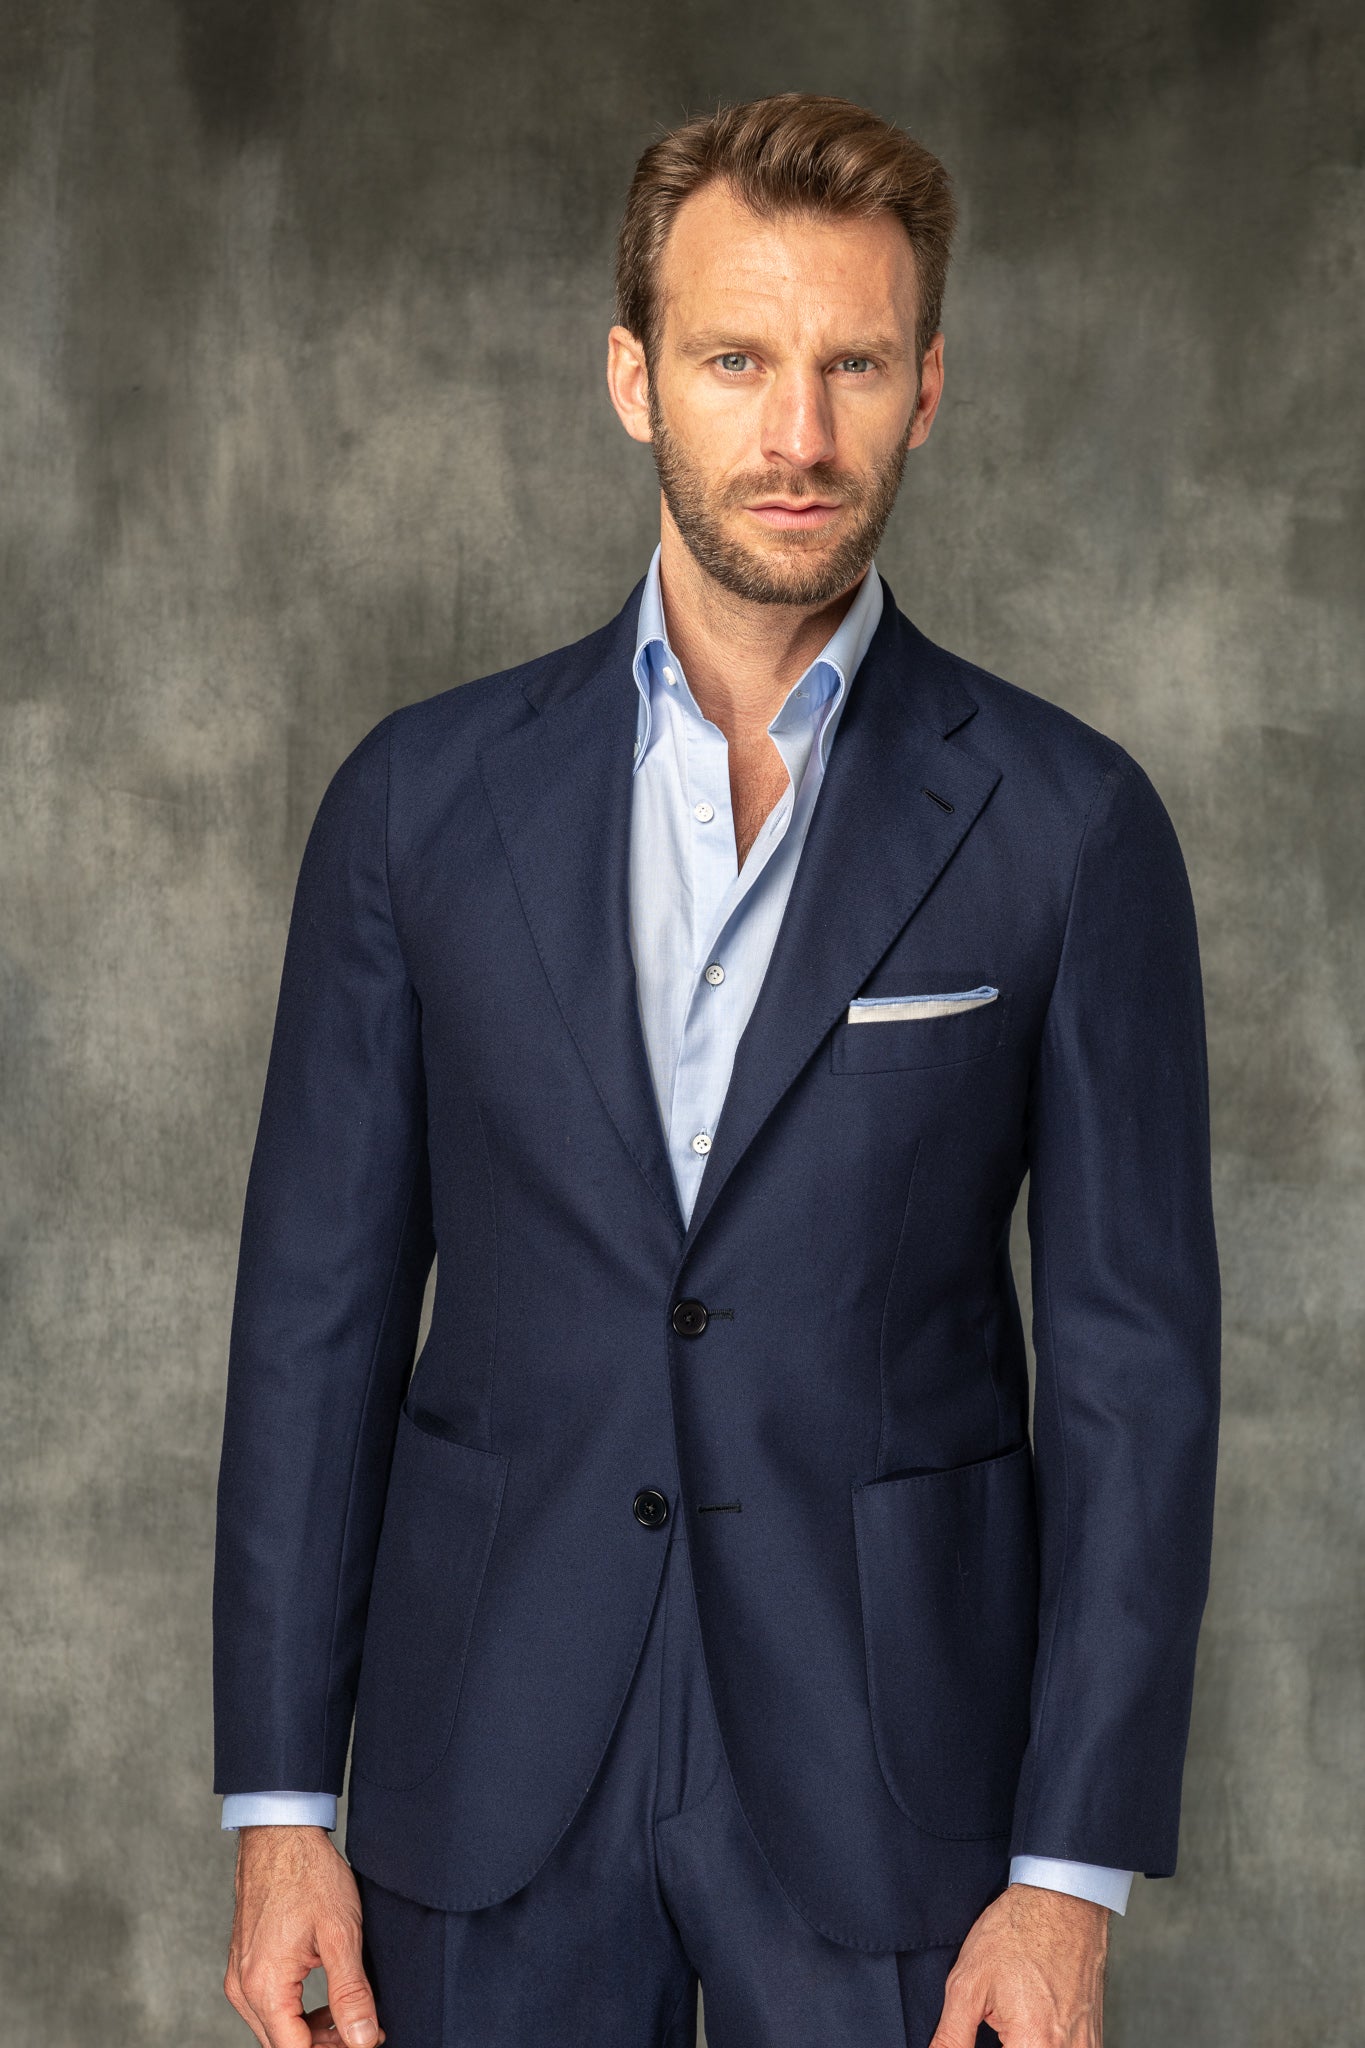 Blue suit "Aria" wool Super 150 - Made in Italy